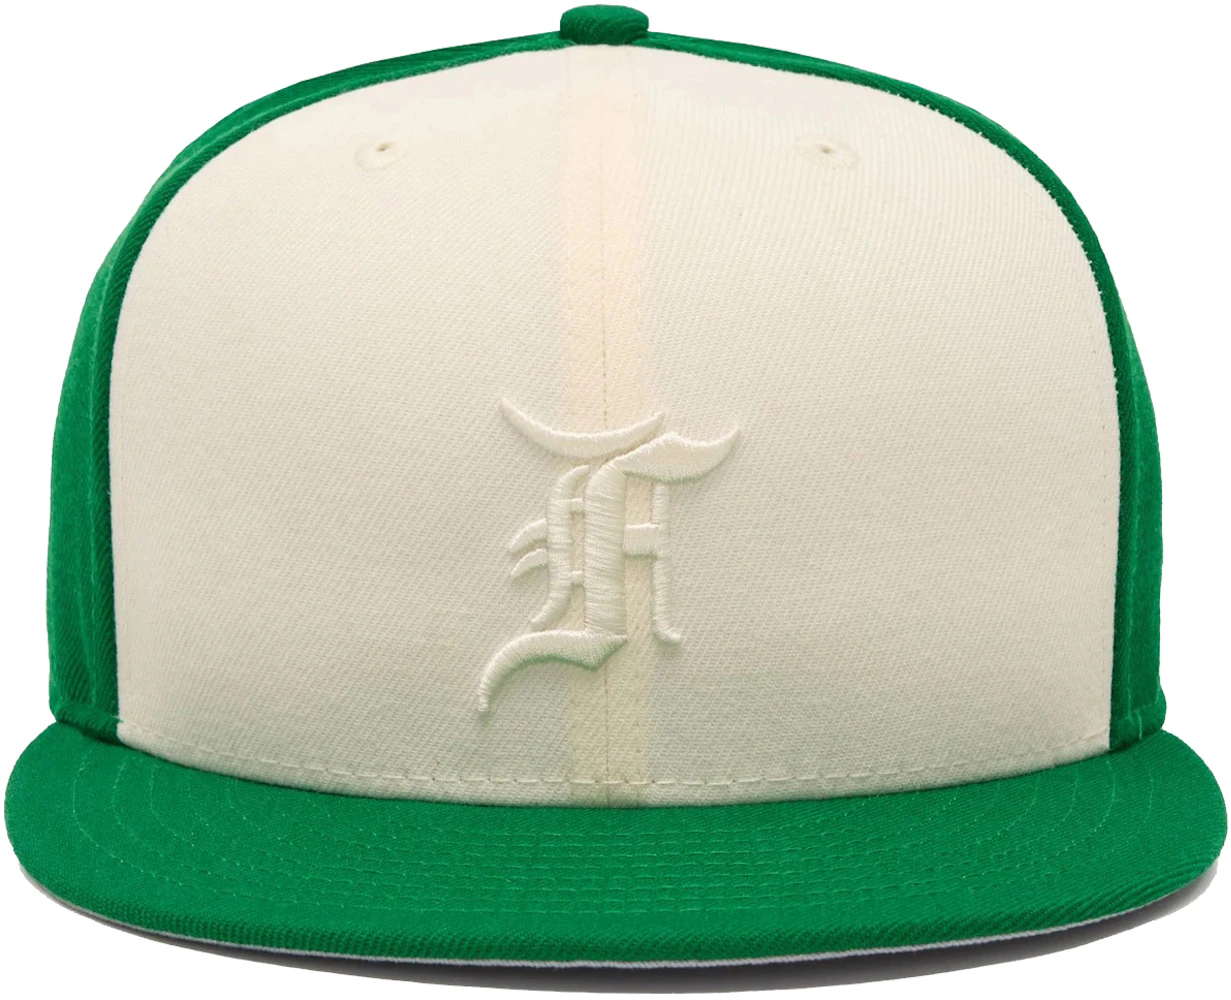 MLB New Era Fear of God Essentials 59FIFTY Fitted Hat - Kelly Green